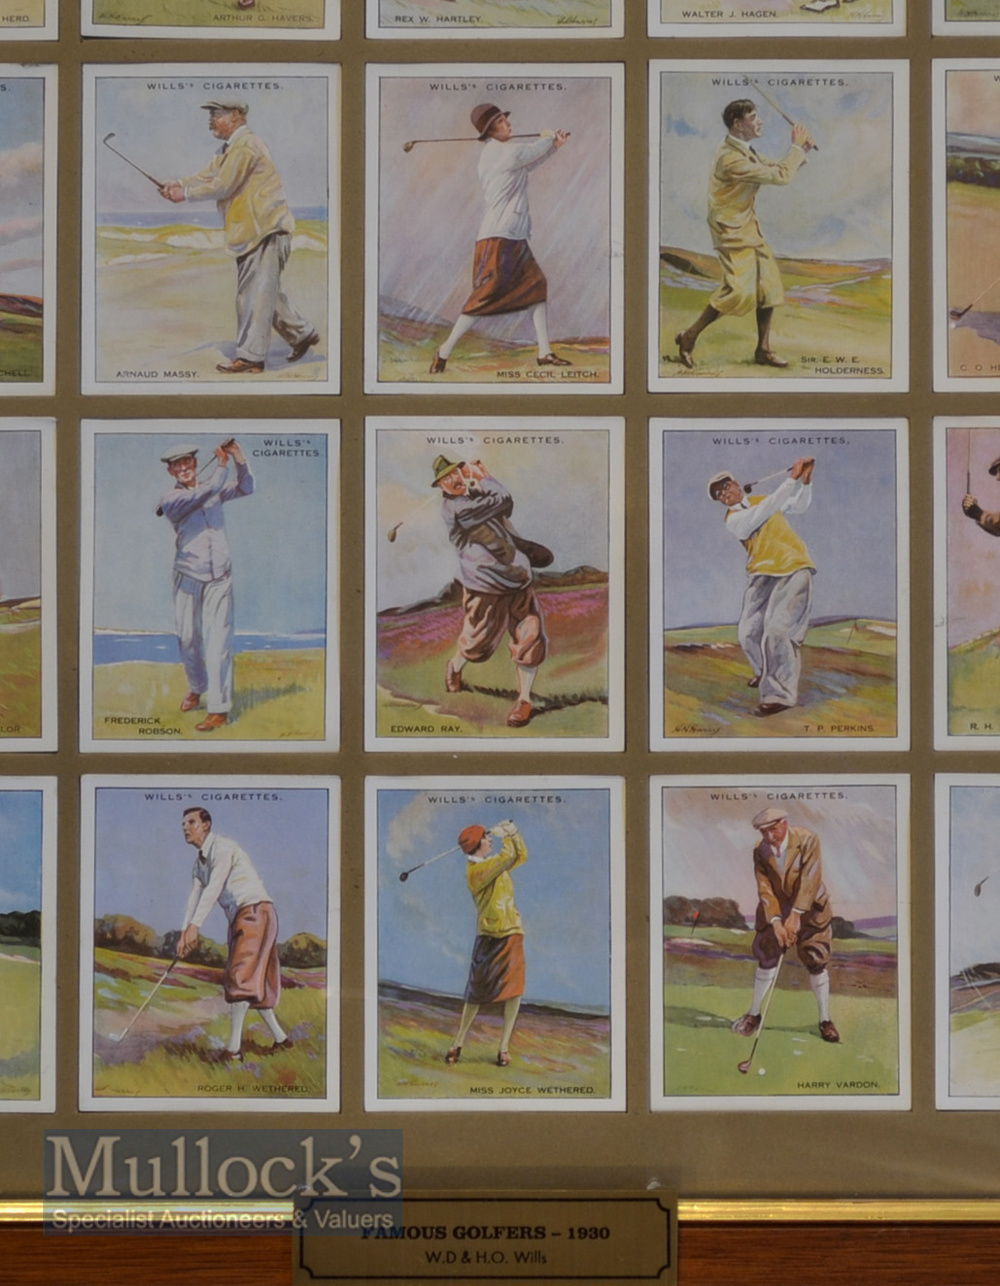 W D and H O Wills Golfing Cigarette Cards c1930 titled “Famous Golfers” - complete set 25/25 large